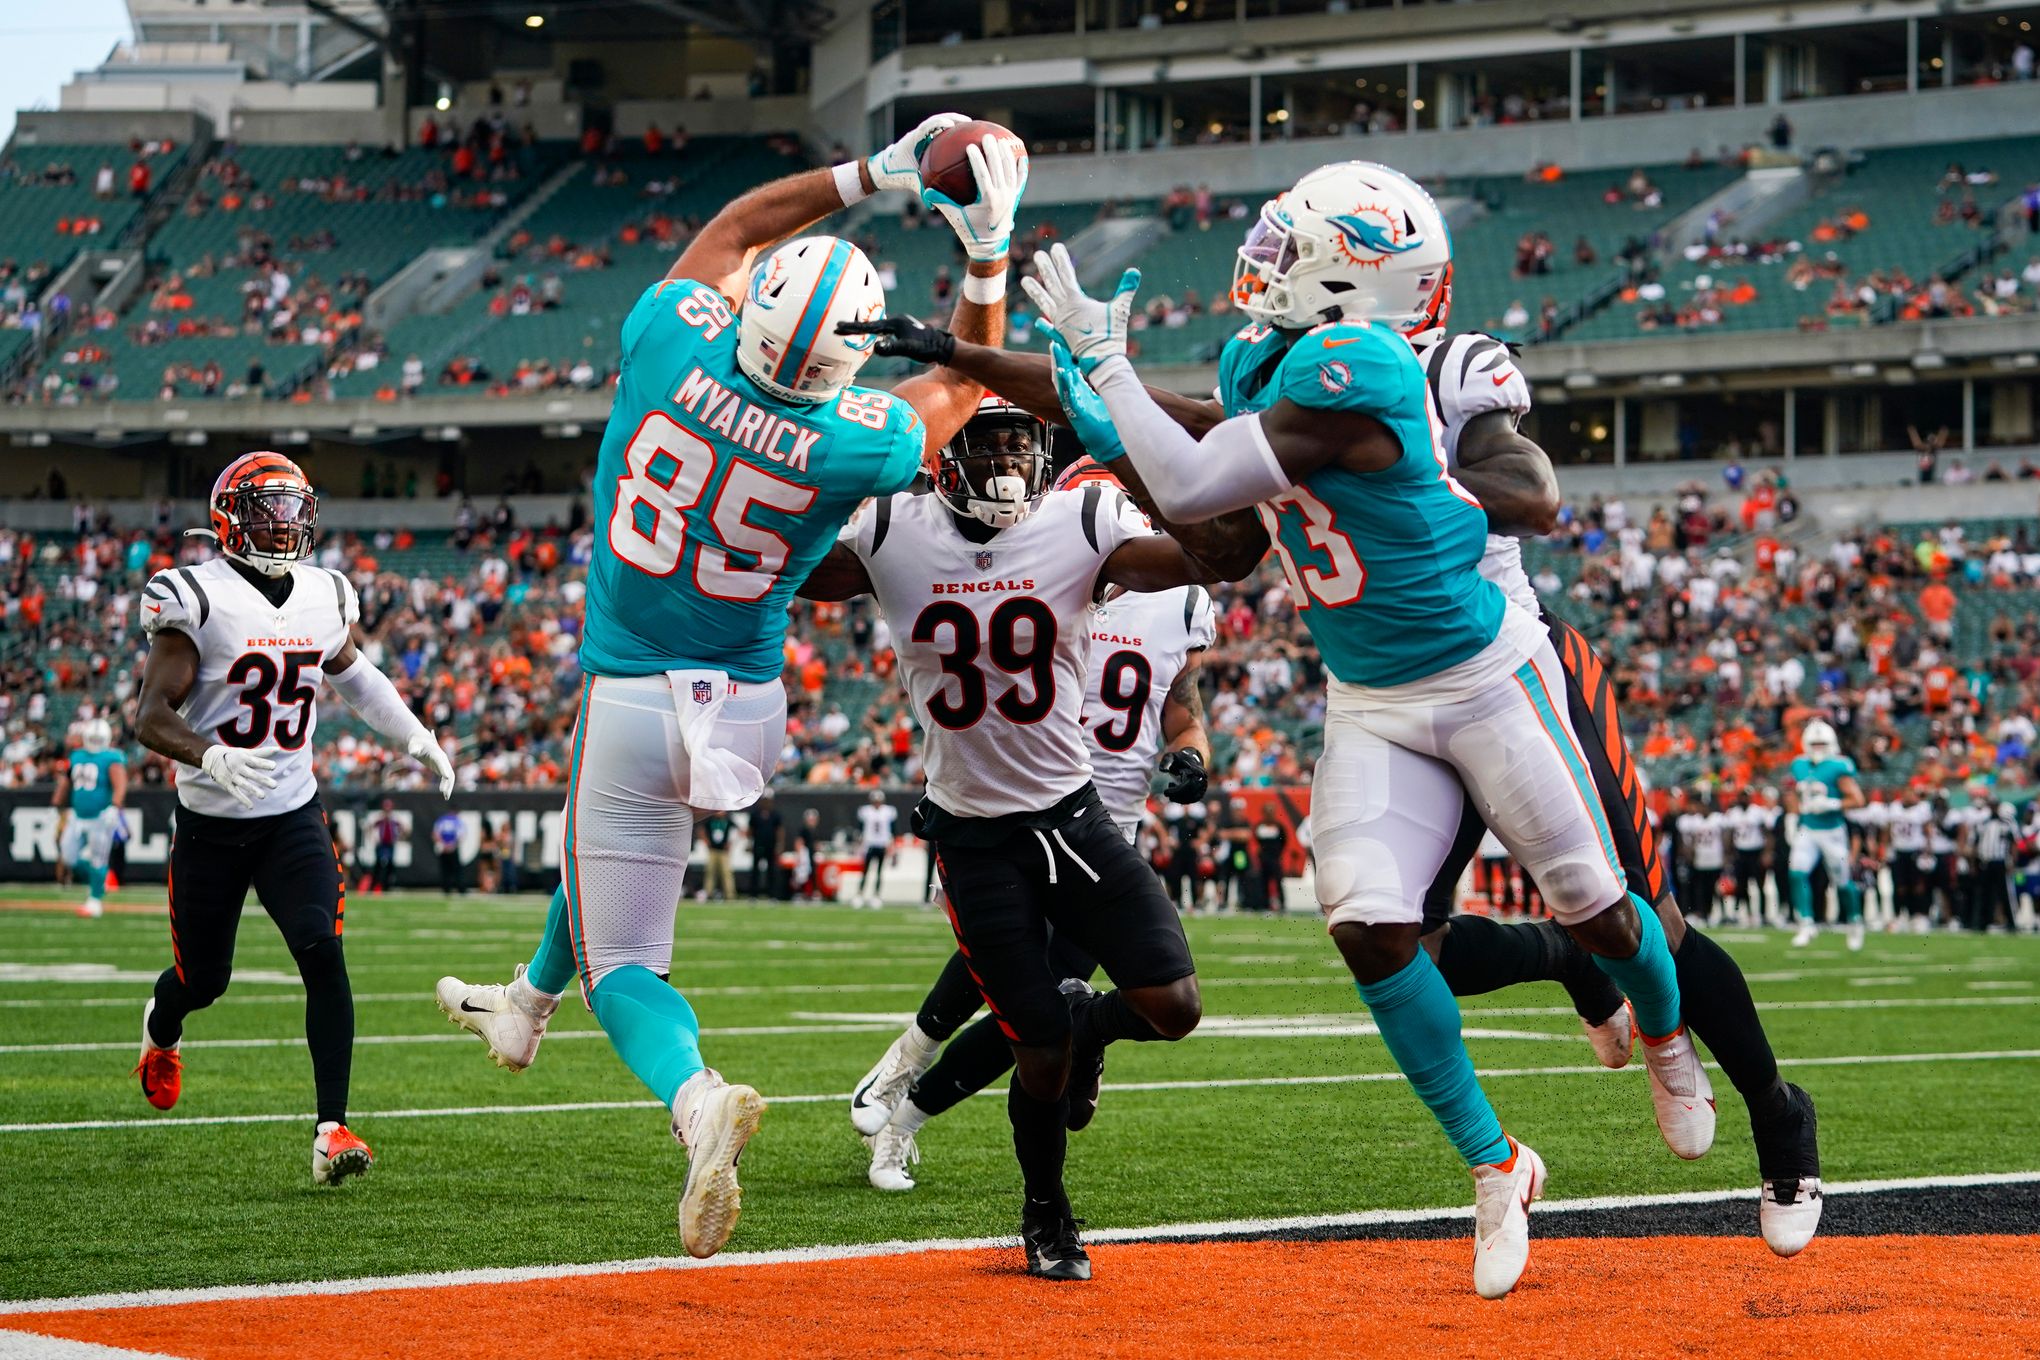 dolphins bengals preview